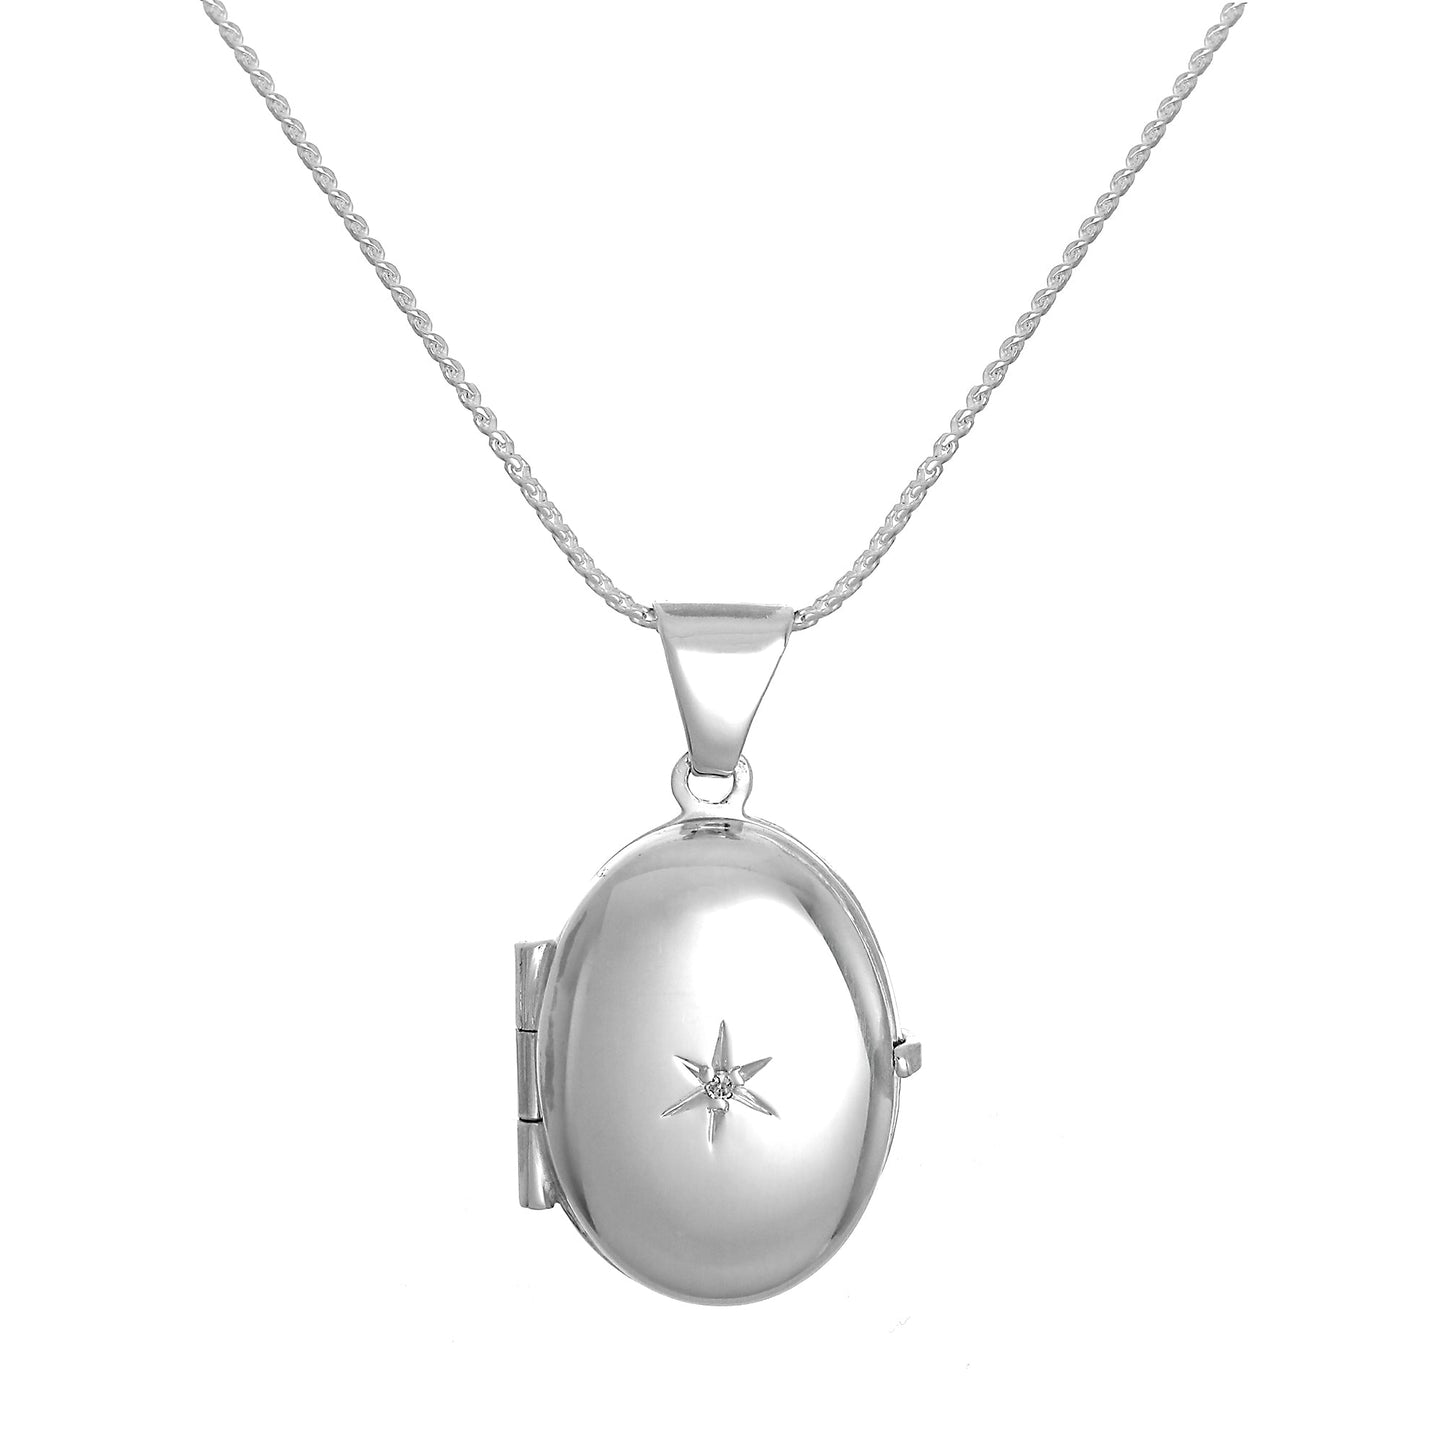 Kleines ovales Sterling Silber Medaillon mit Diamant an Kette